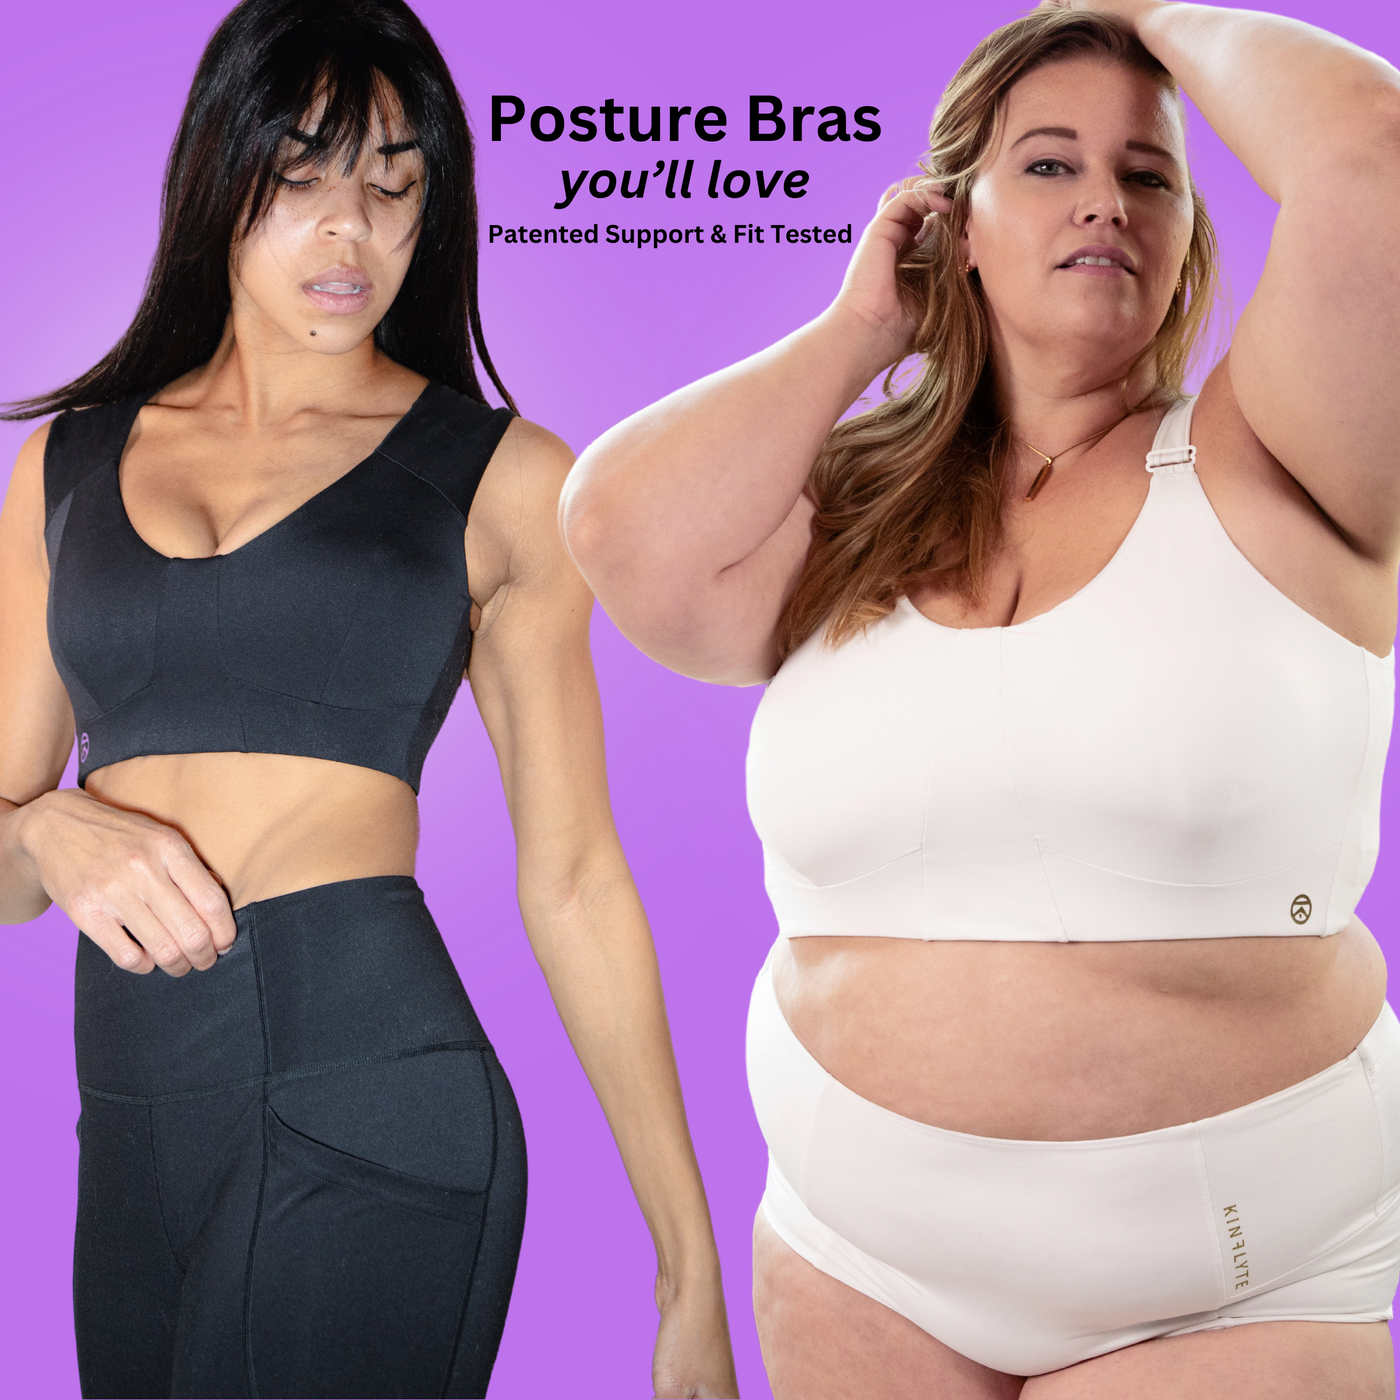 Most inclusive posture bras with sizes XS to 7XL.  Kinflyte's line of patented posture bras are posture corrector sports bra. Comfortable posture corrector bras deliver shoulder support, back support, targeted compression